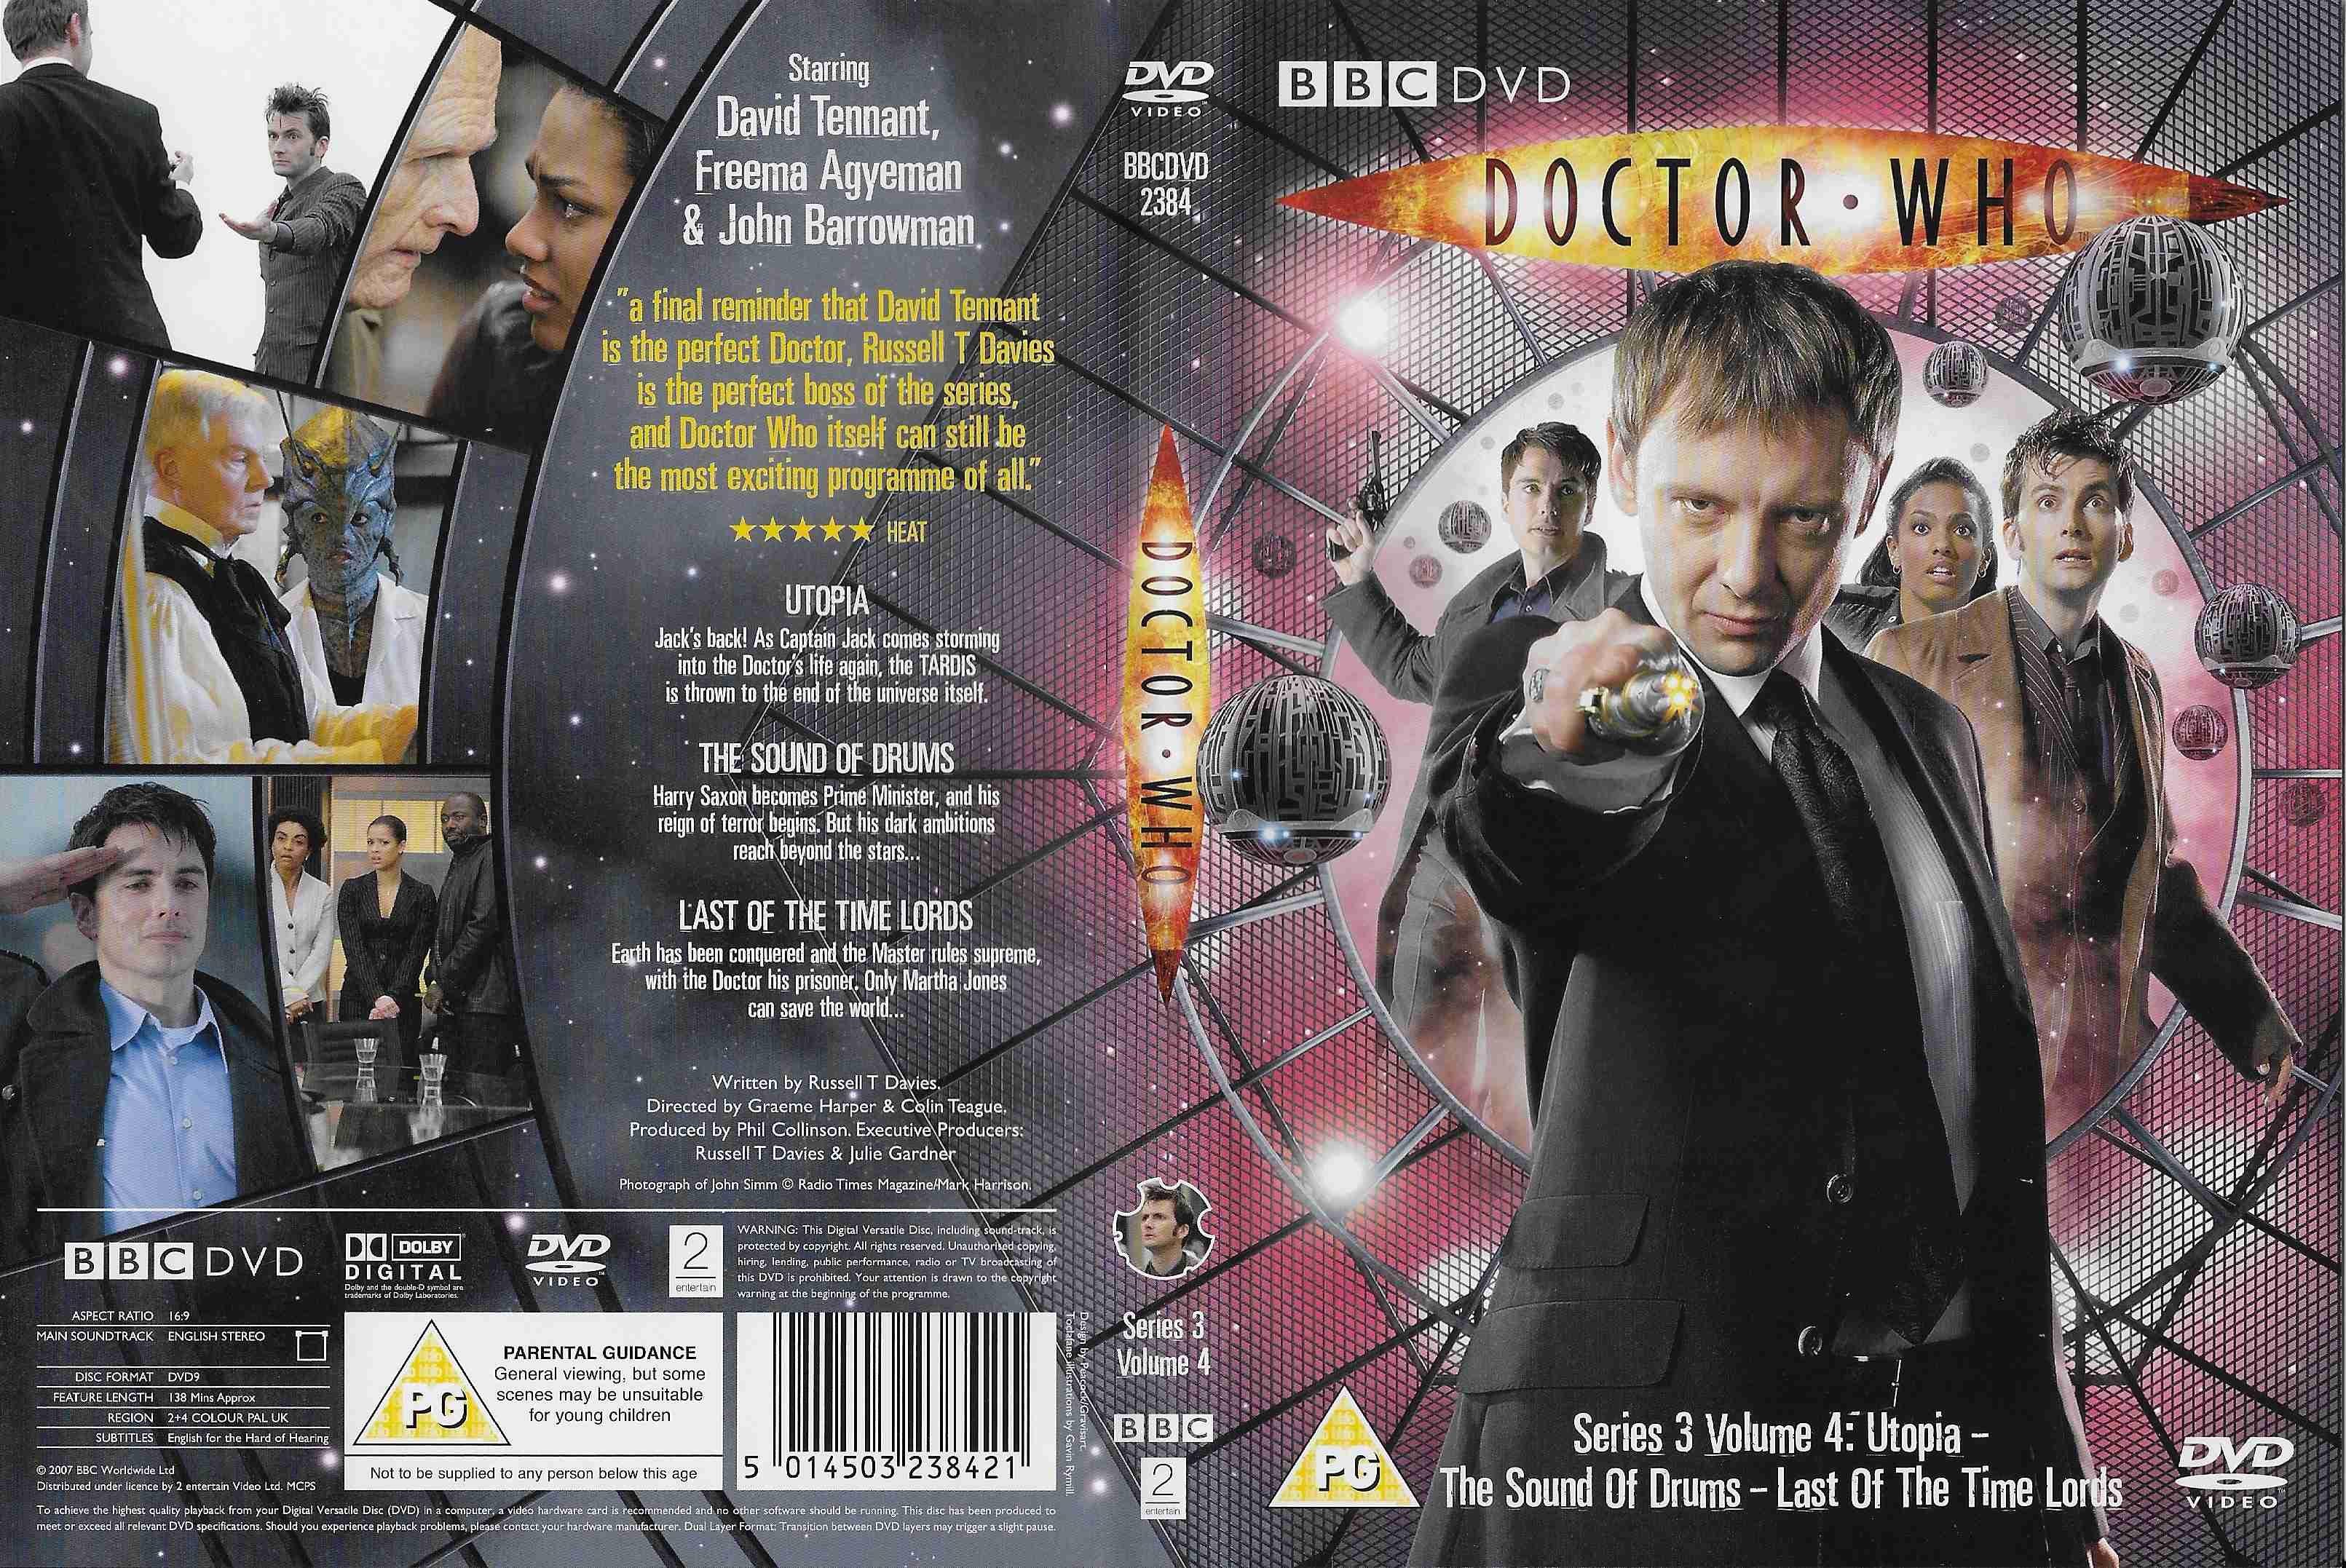 Picture of BBCDVD 2384 Doctor Who - Series 3, volume 4 by artist Russell T Davies from the BBC records and Tapes library